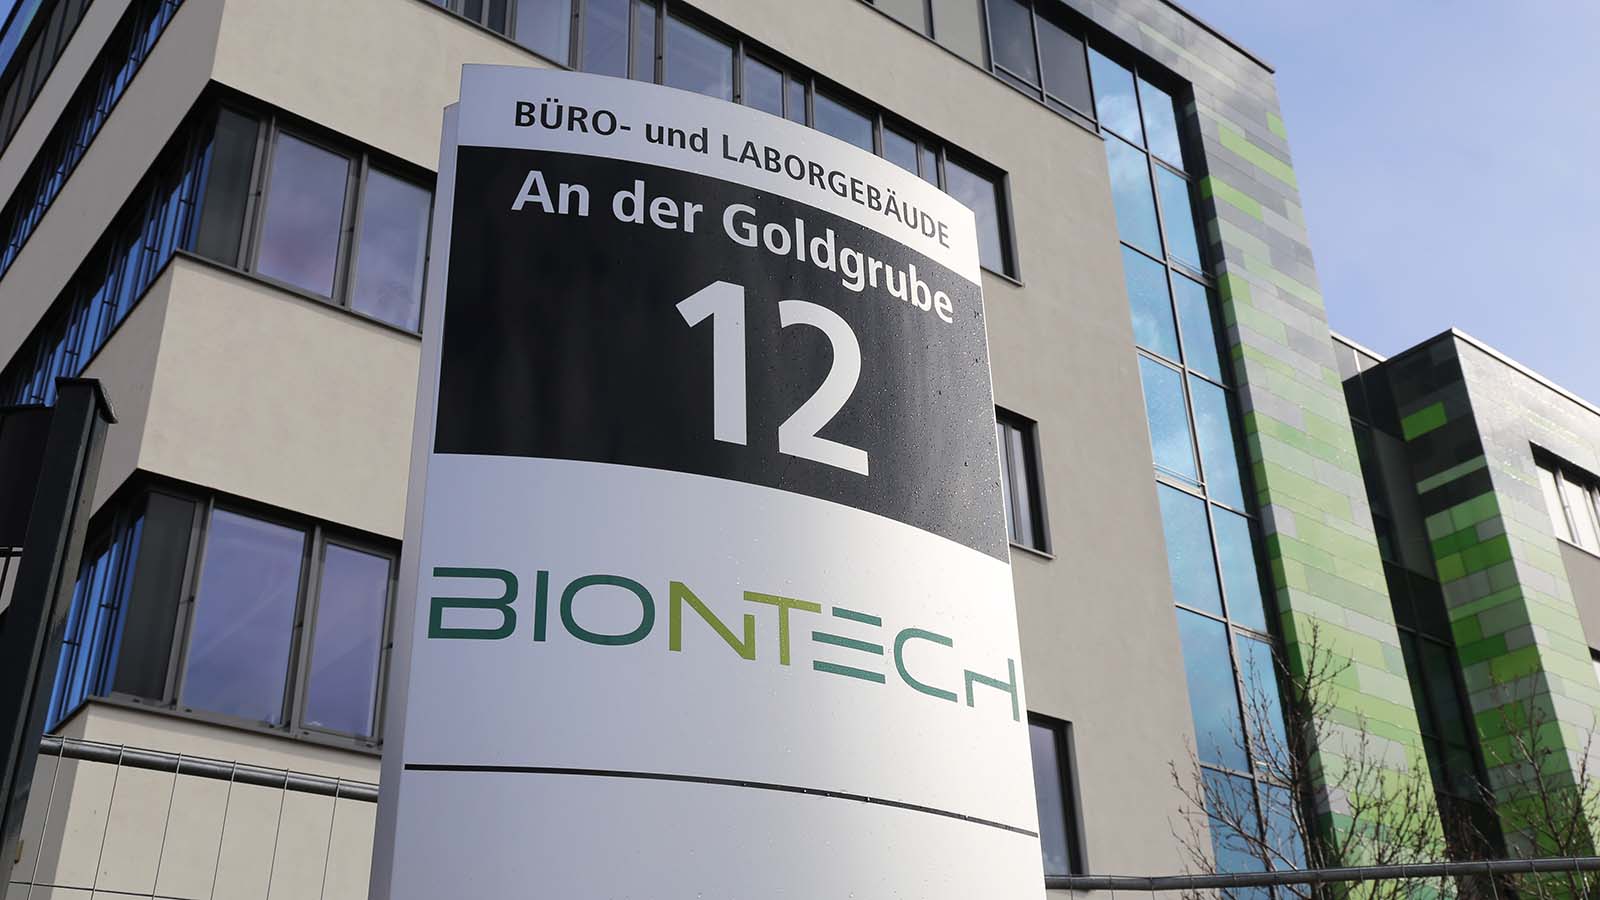 The headquarters of BioNTech (BNTX stock) in Germany.